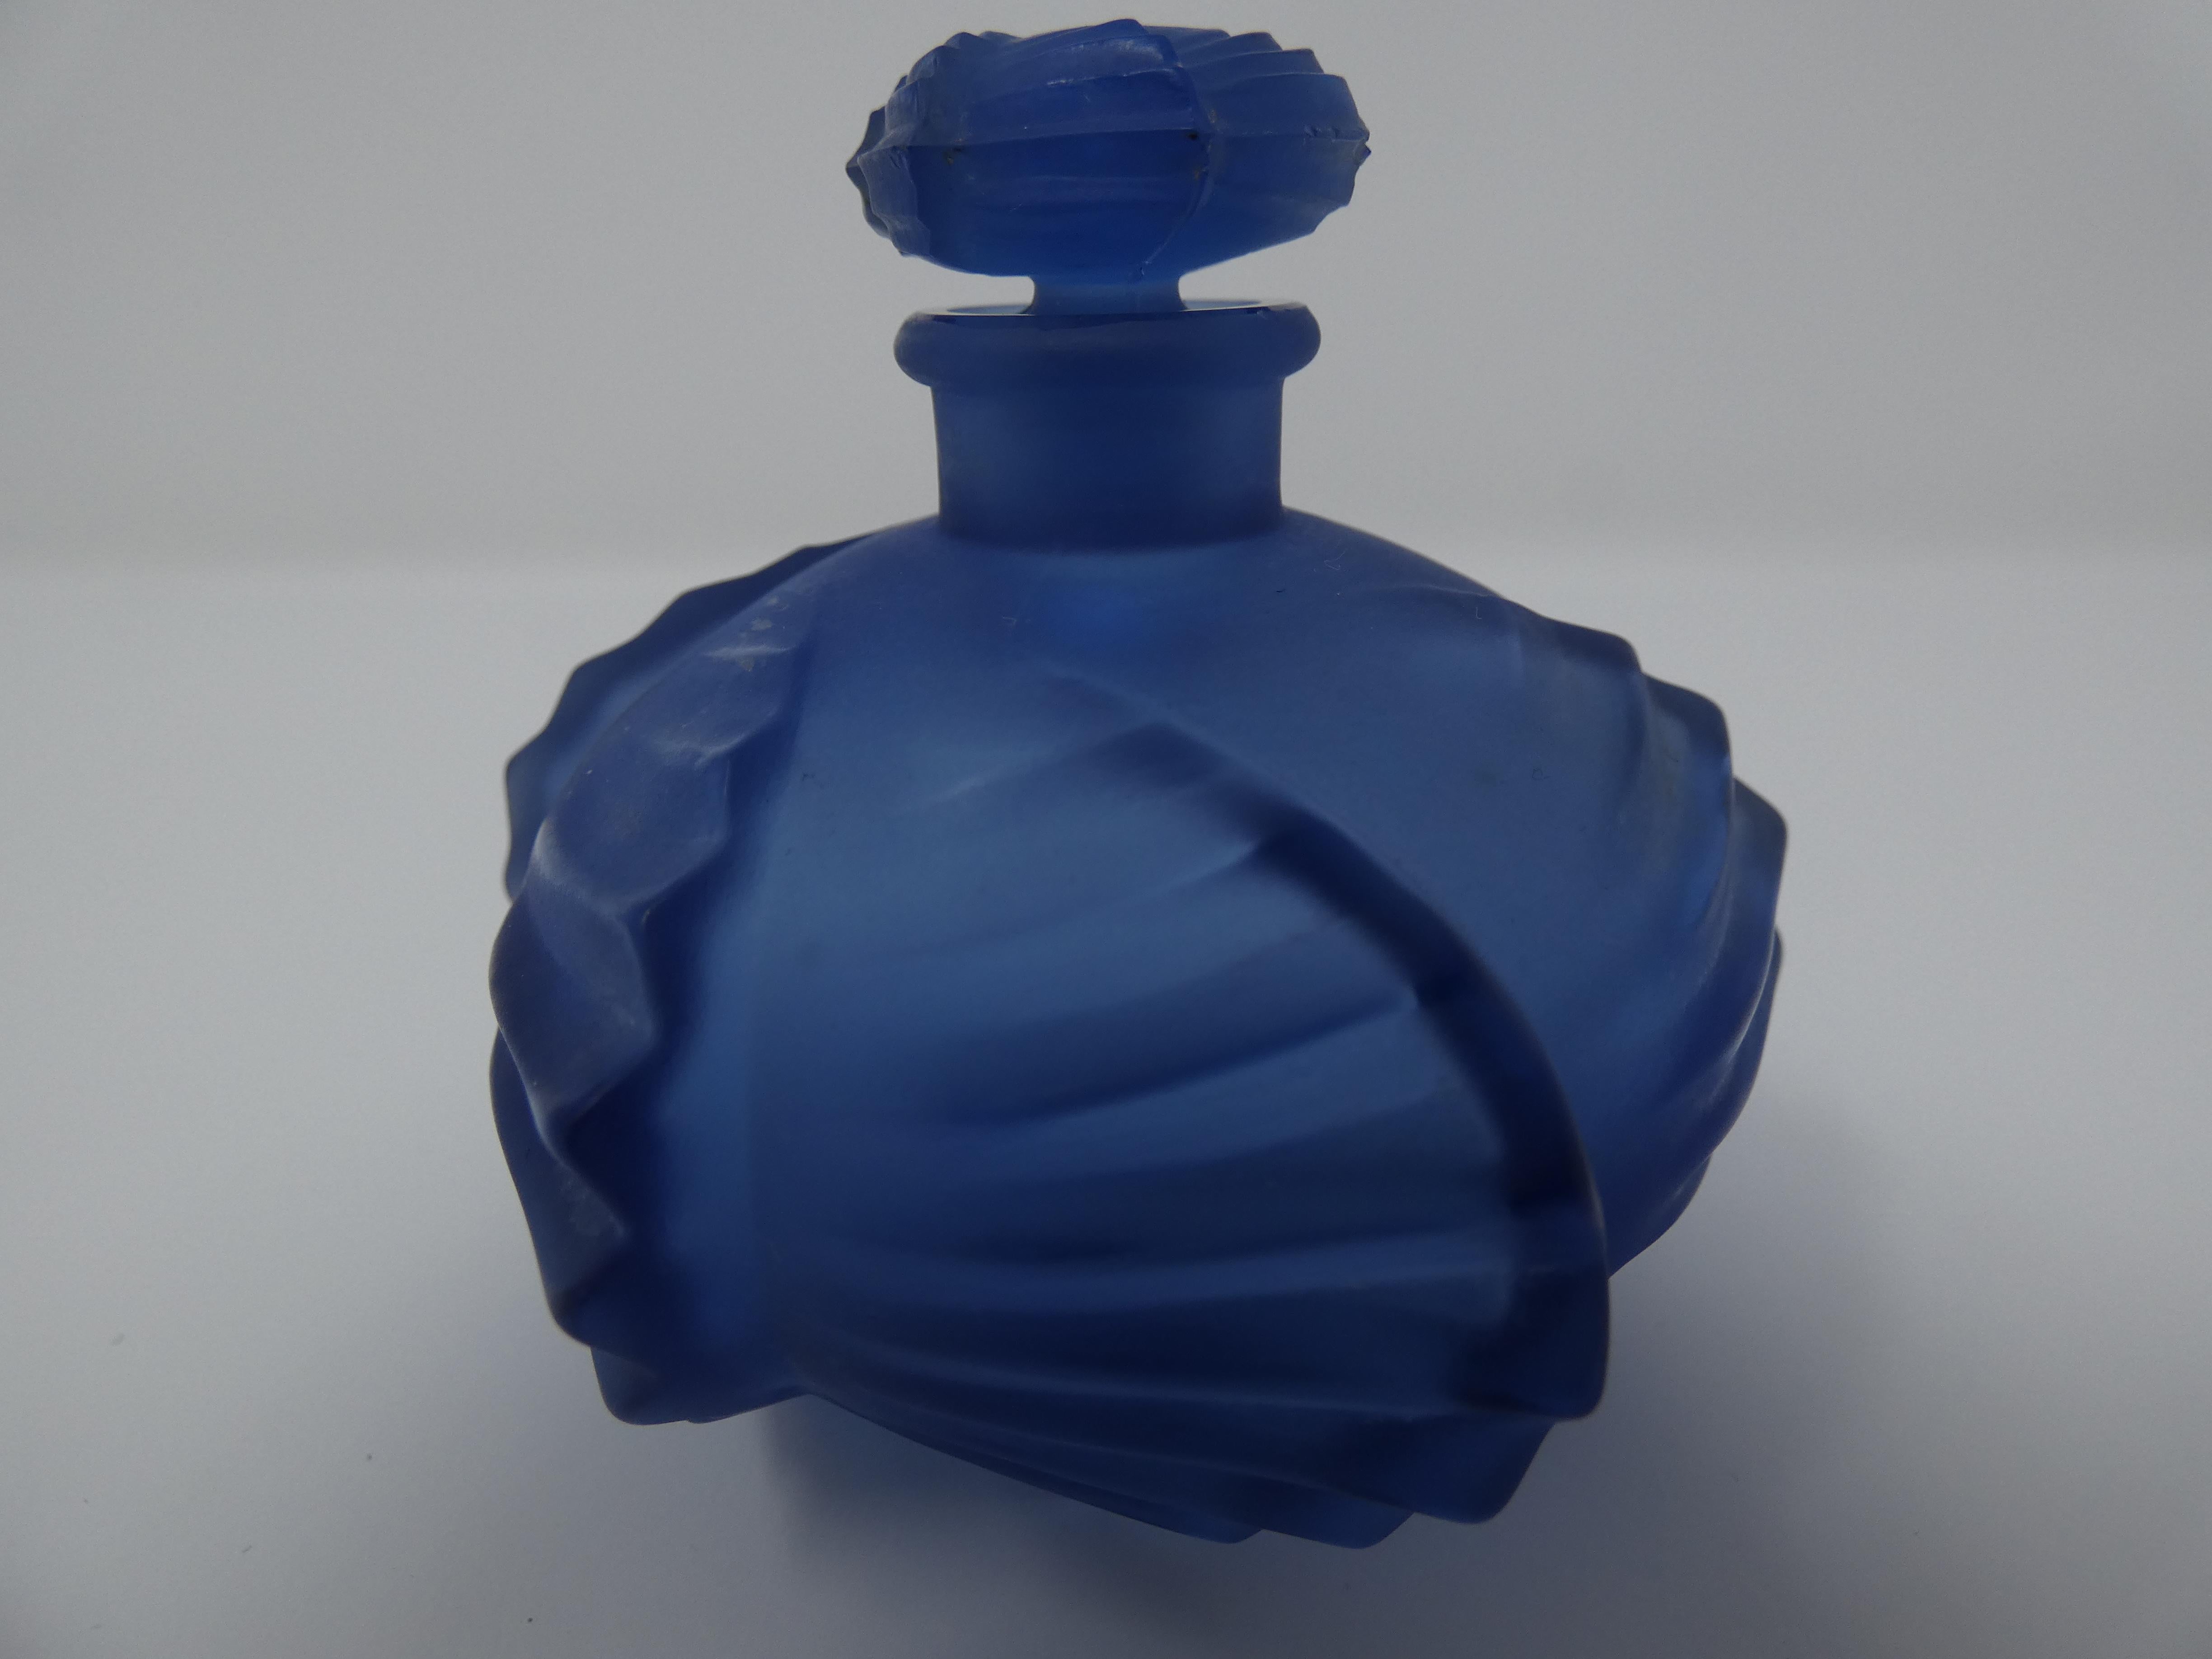 Rene Lalique blue glass 'Camille' perfume bottle. Moulded and engraved makers mark, 'R. Lalique France No516'. Book reference: Marcilhac 516.